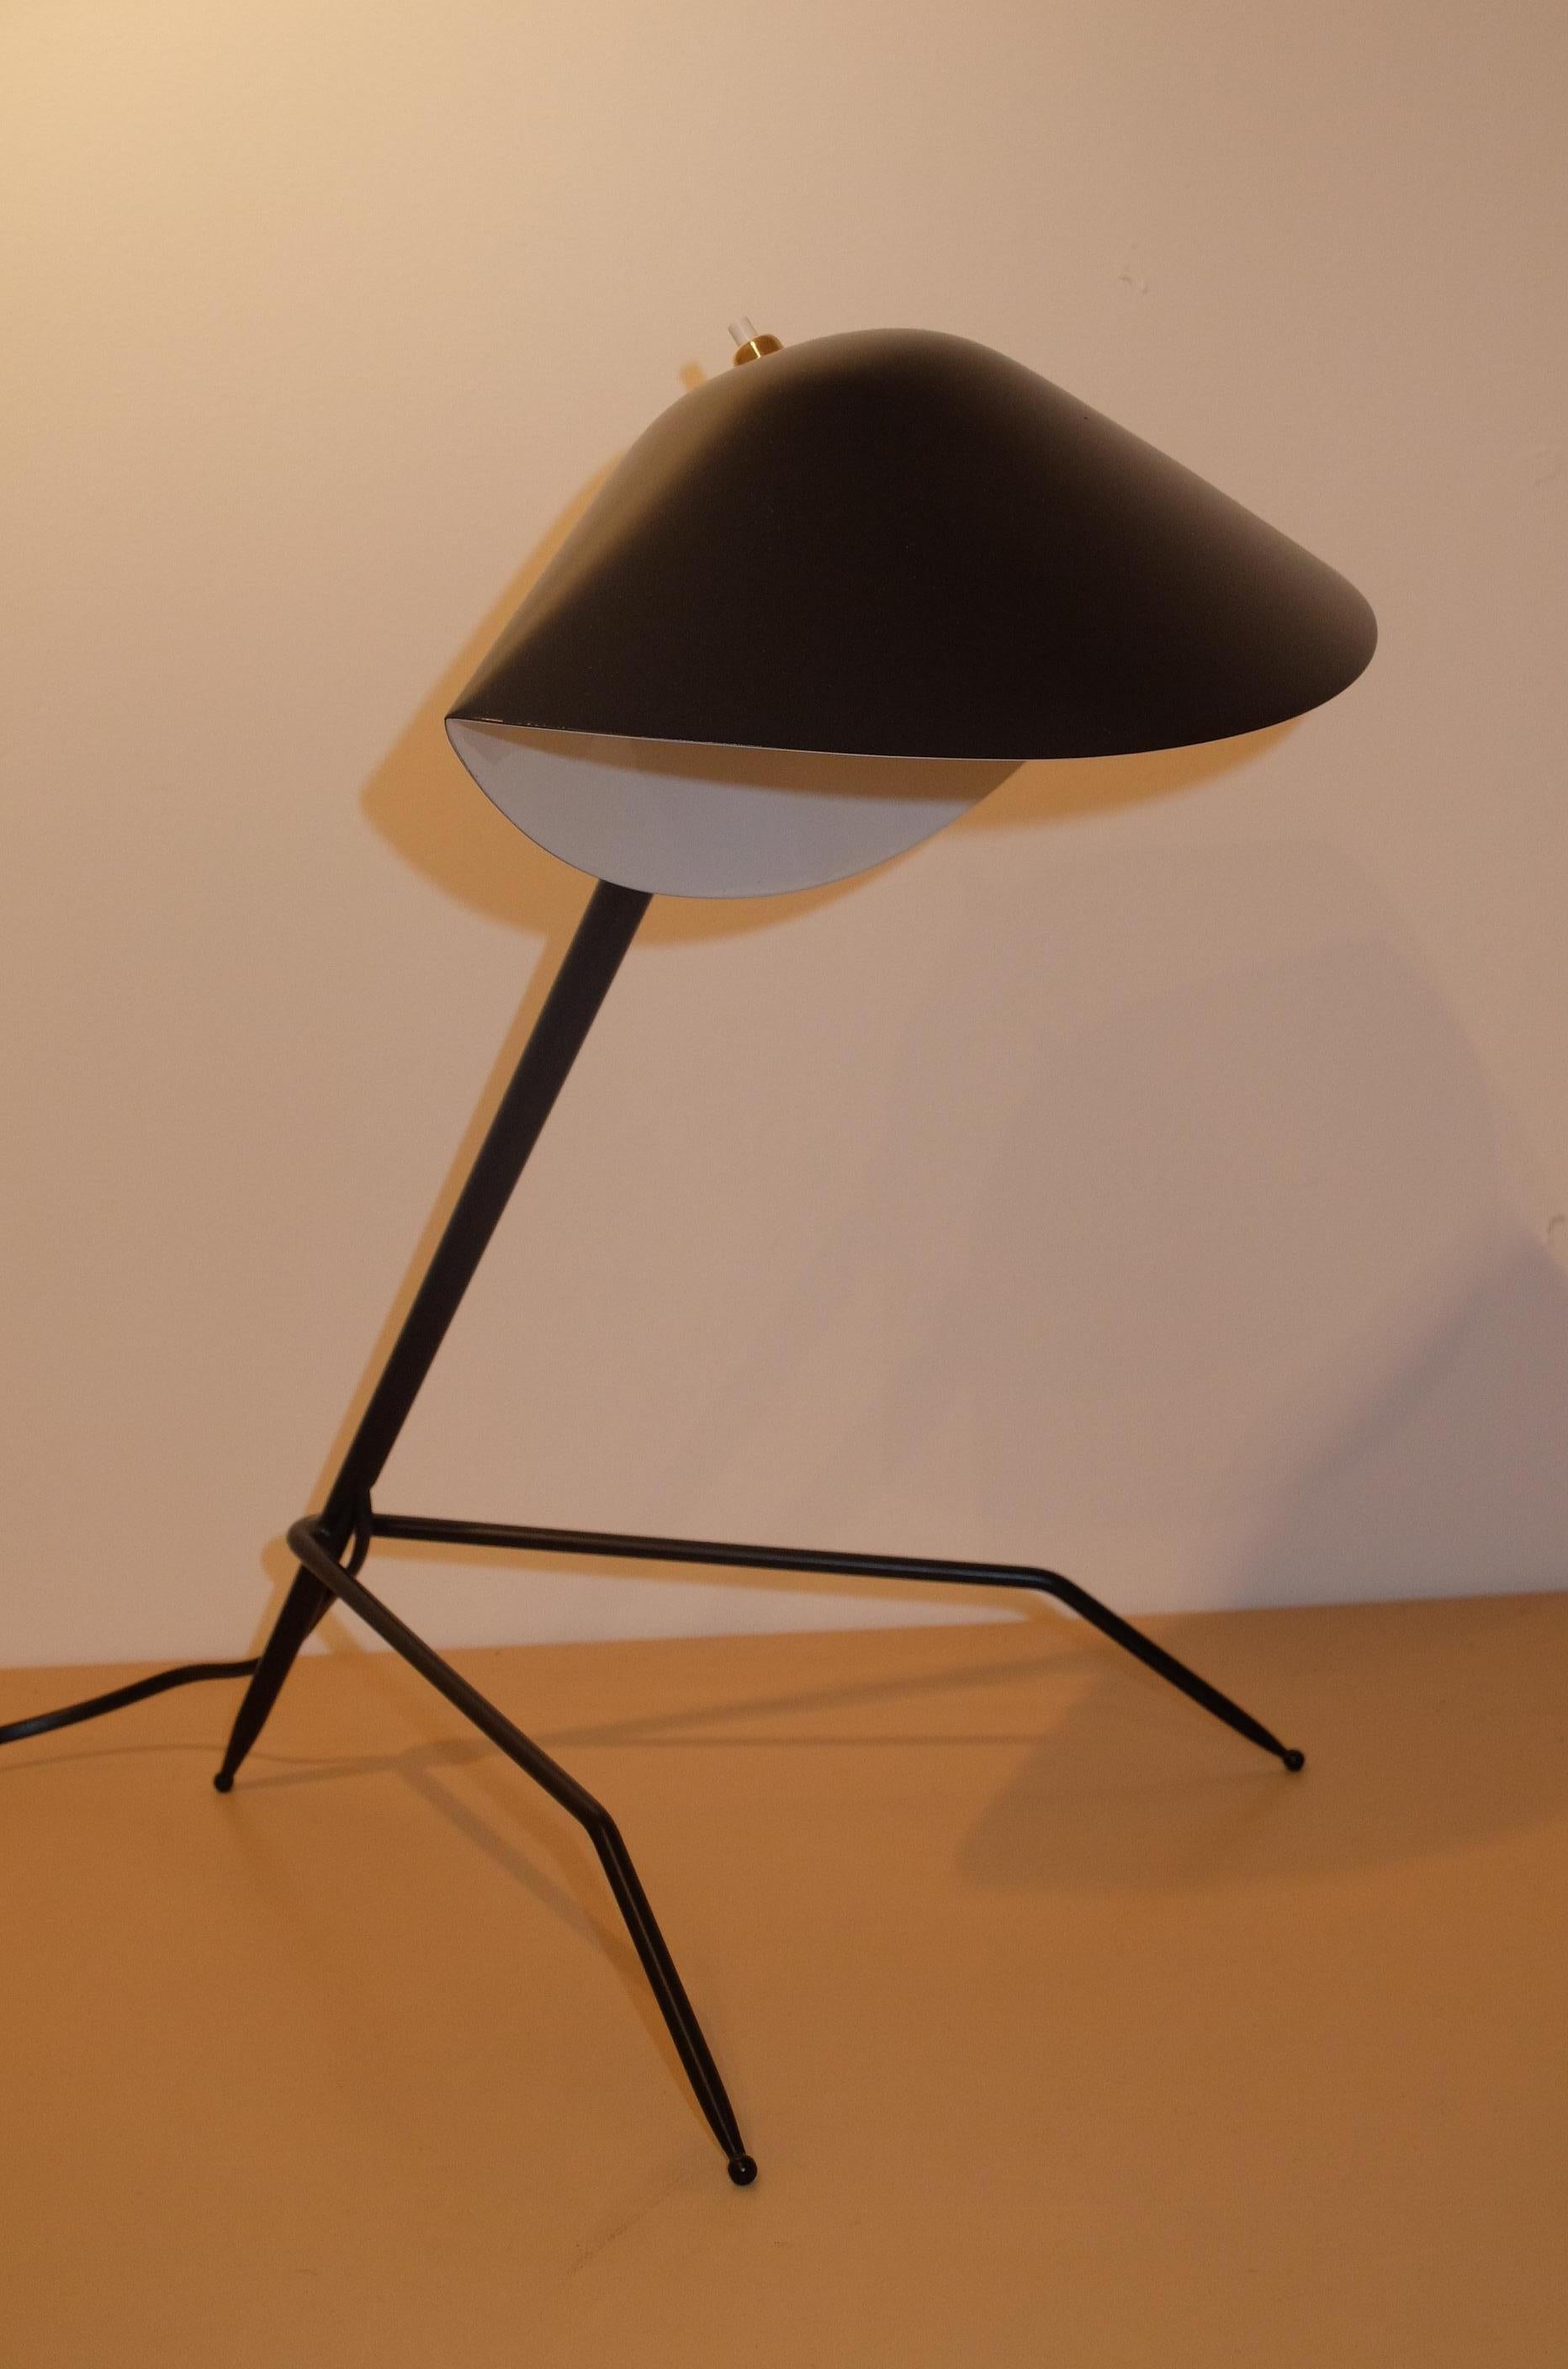 The wonderful emblematic look-a-like ant lamp by Serge Mouille.